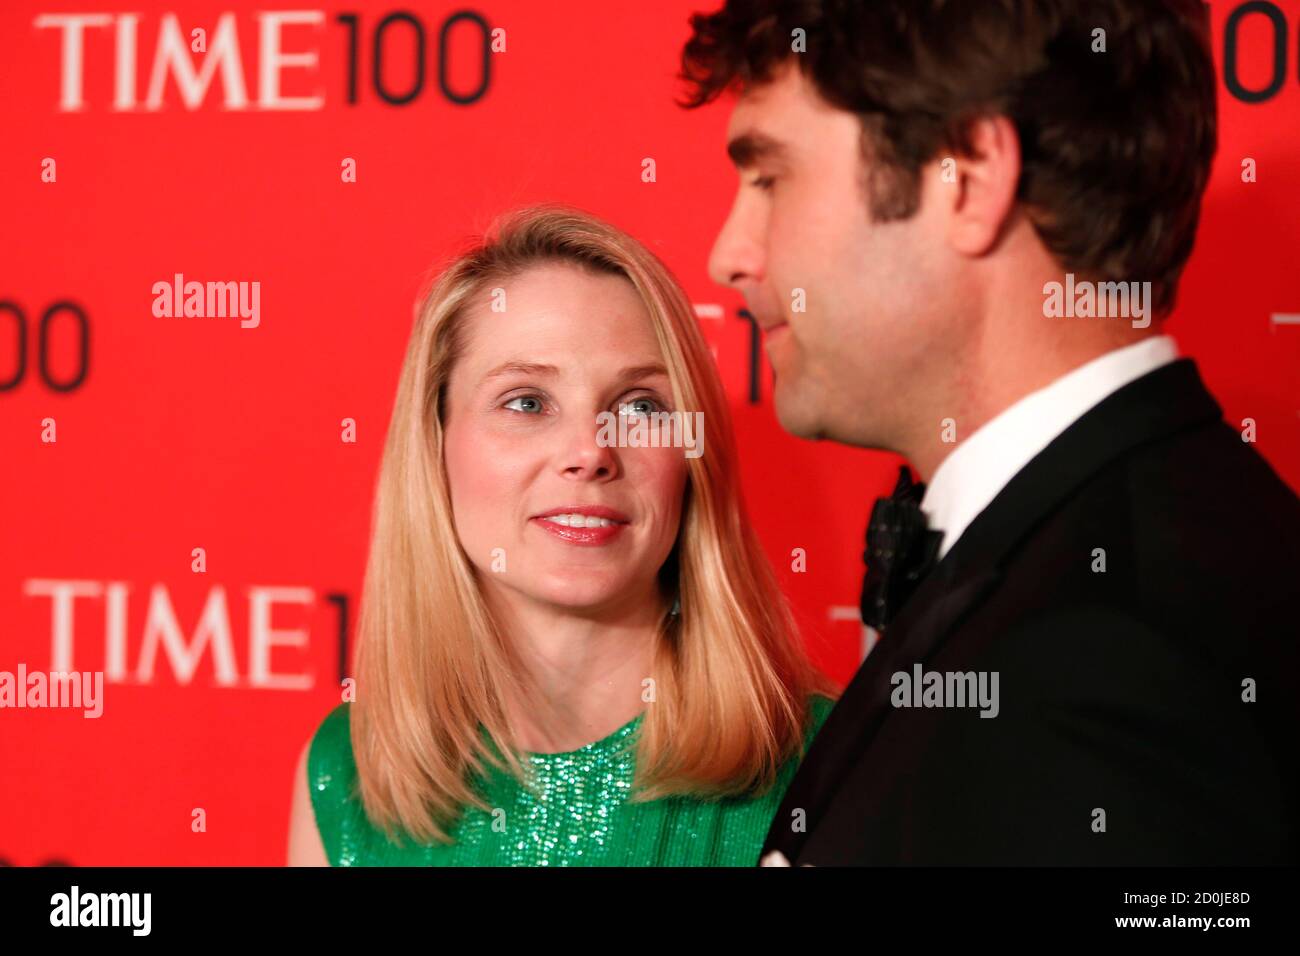 President and CEO of Yahoo, Marissa Mayer, arrives with Zachary Bogue for  the Time 100 gala celebrating the magazine's naming of the 100 most  influential people in the world for the past